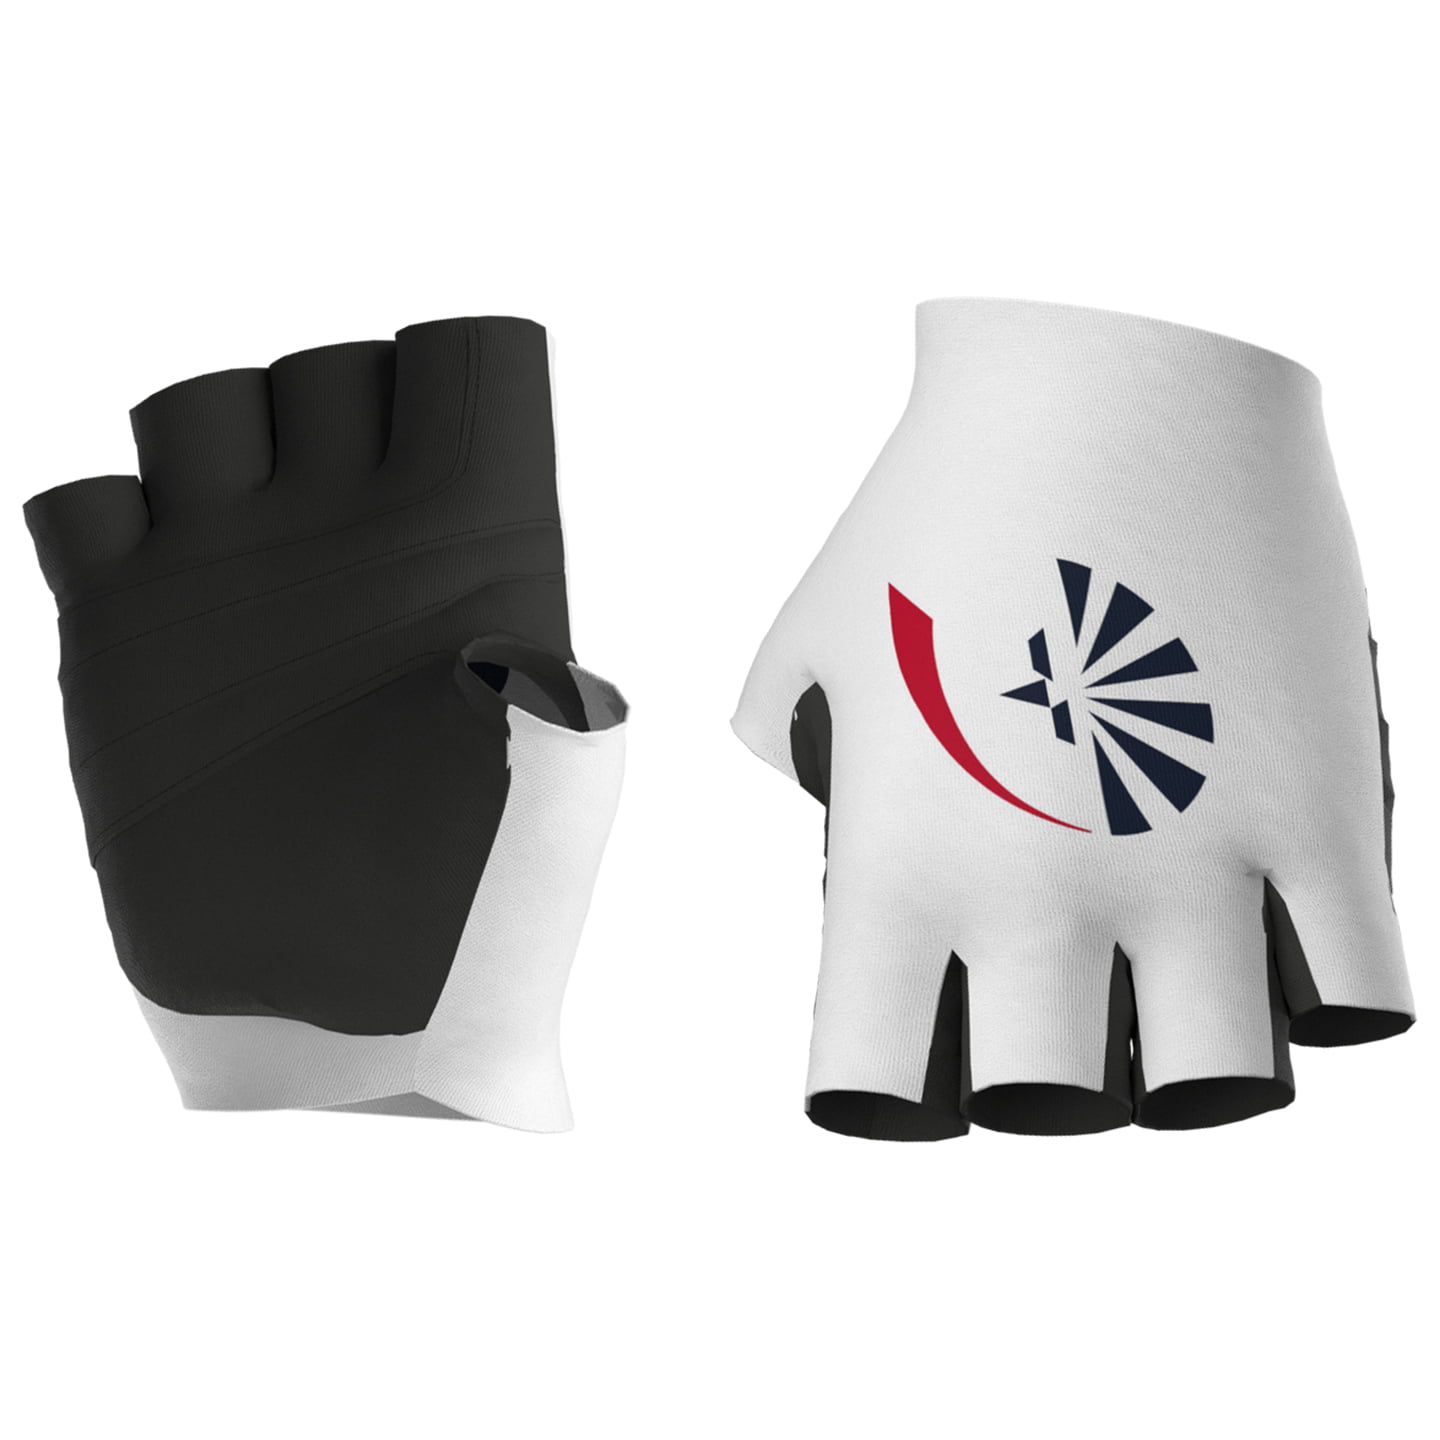 GROUPAMA - FDJ 2023 Cycling Gloves, for men, size S, Cycling gloves, Cycling clothing